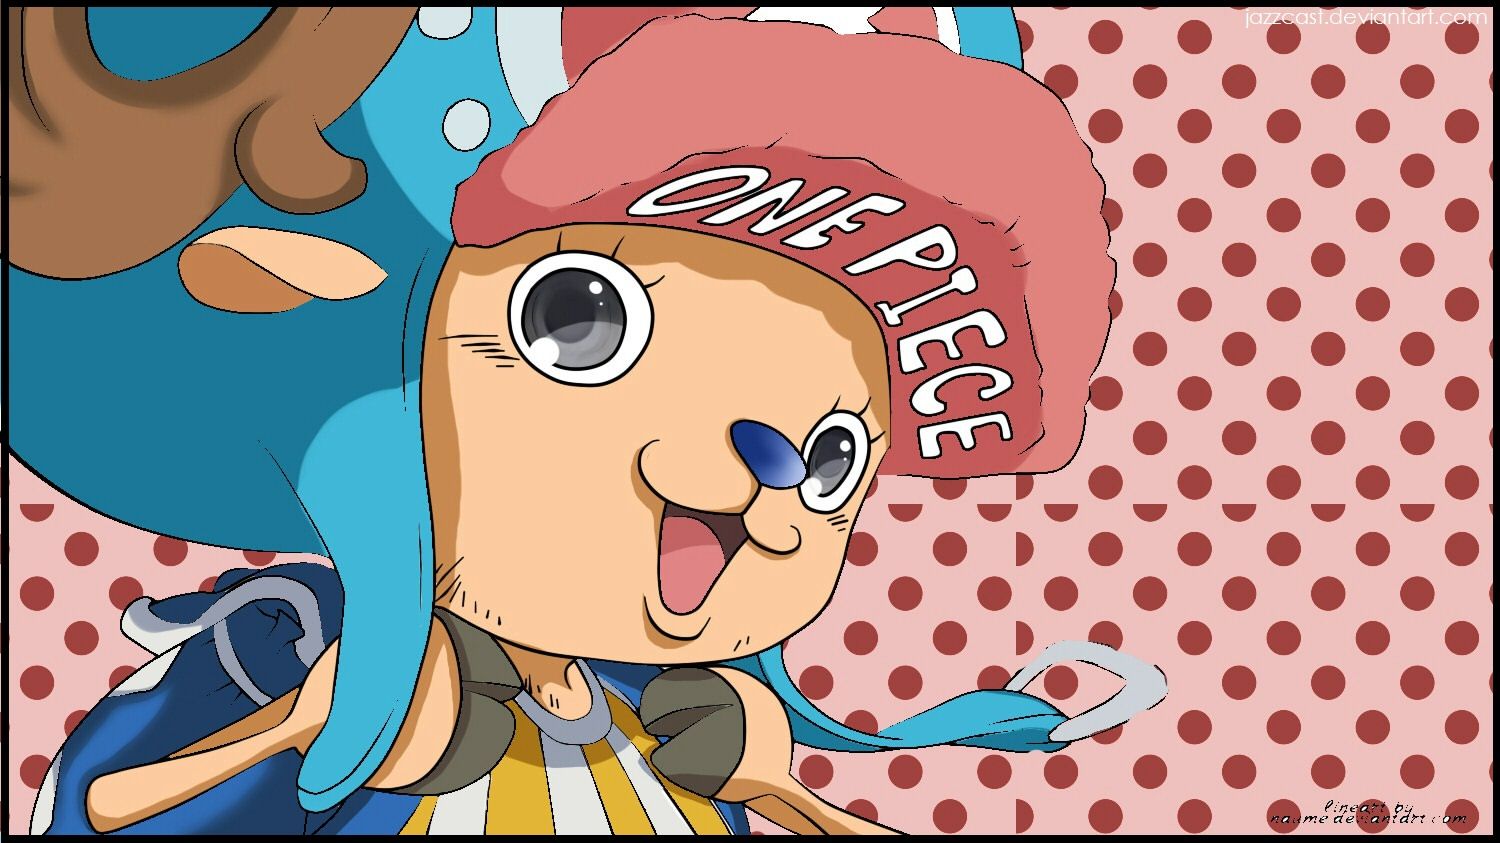 One Piece Chopper HD Picture Wallpapers 10730 - HD Wallpapers Site